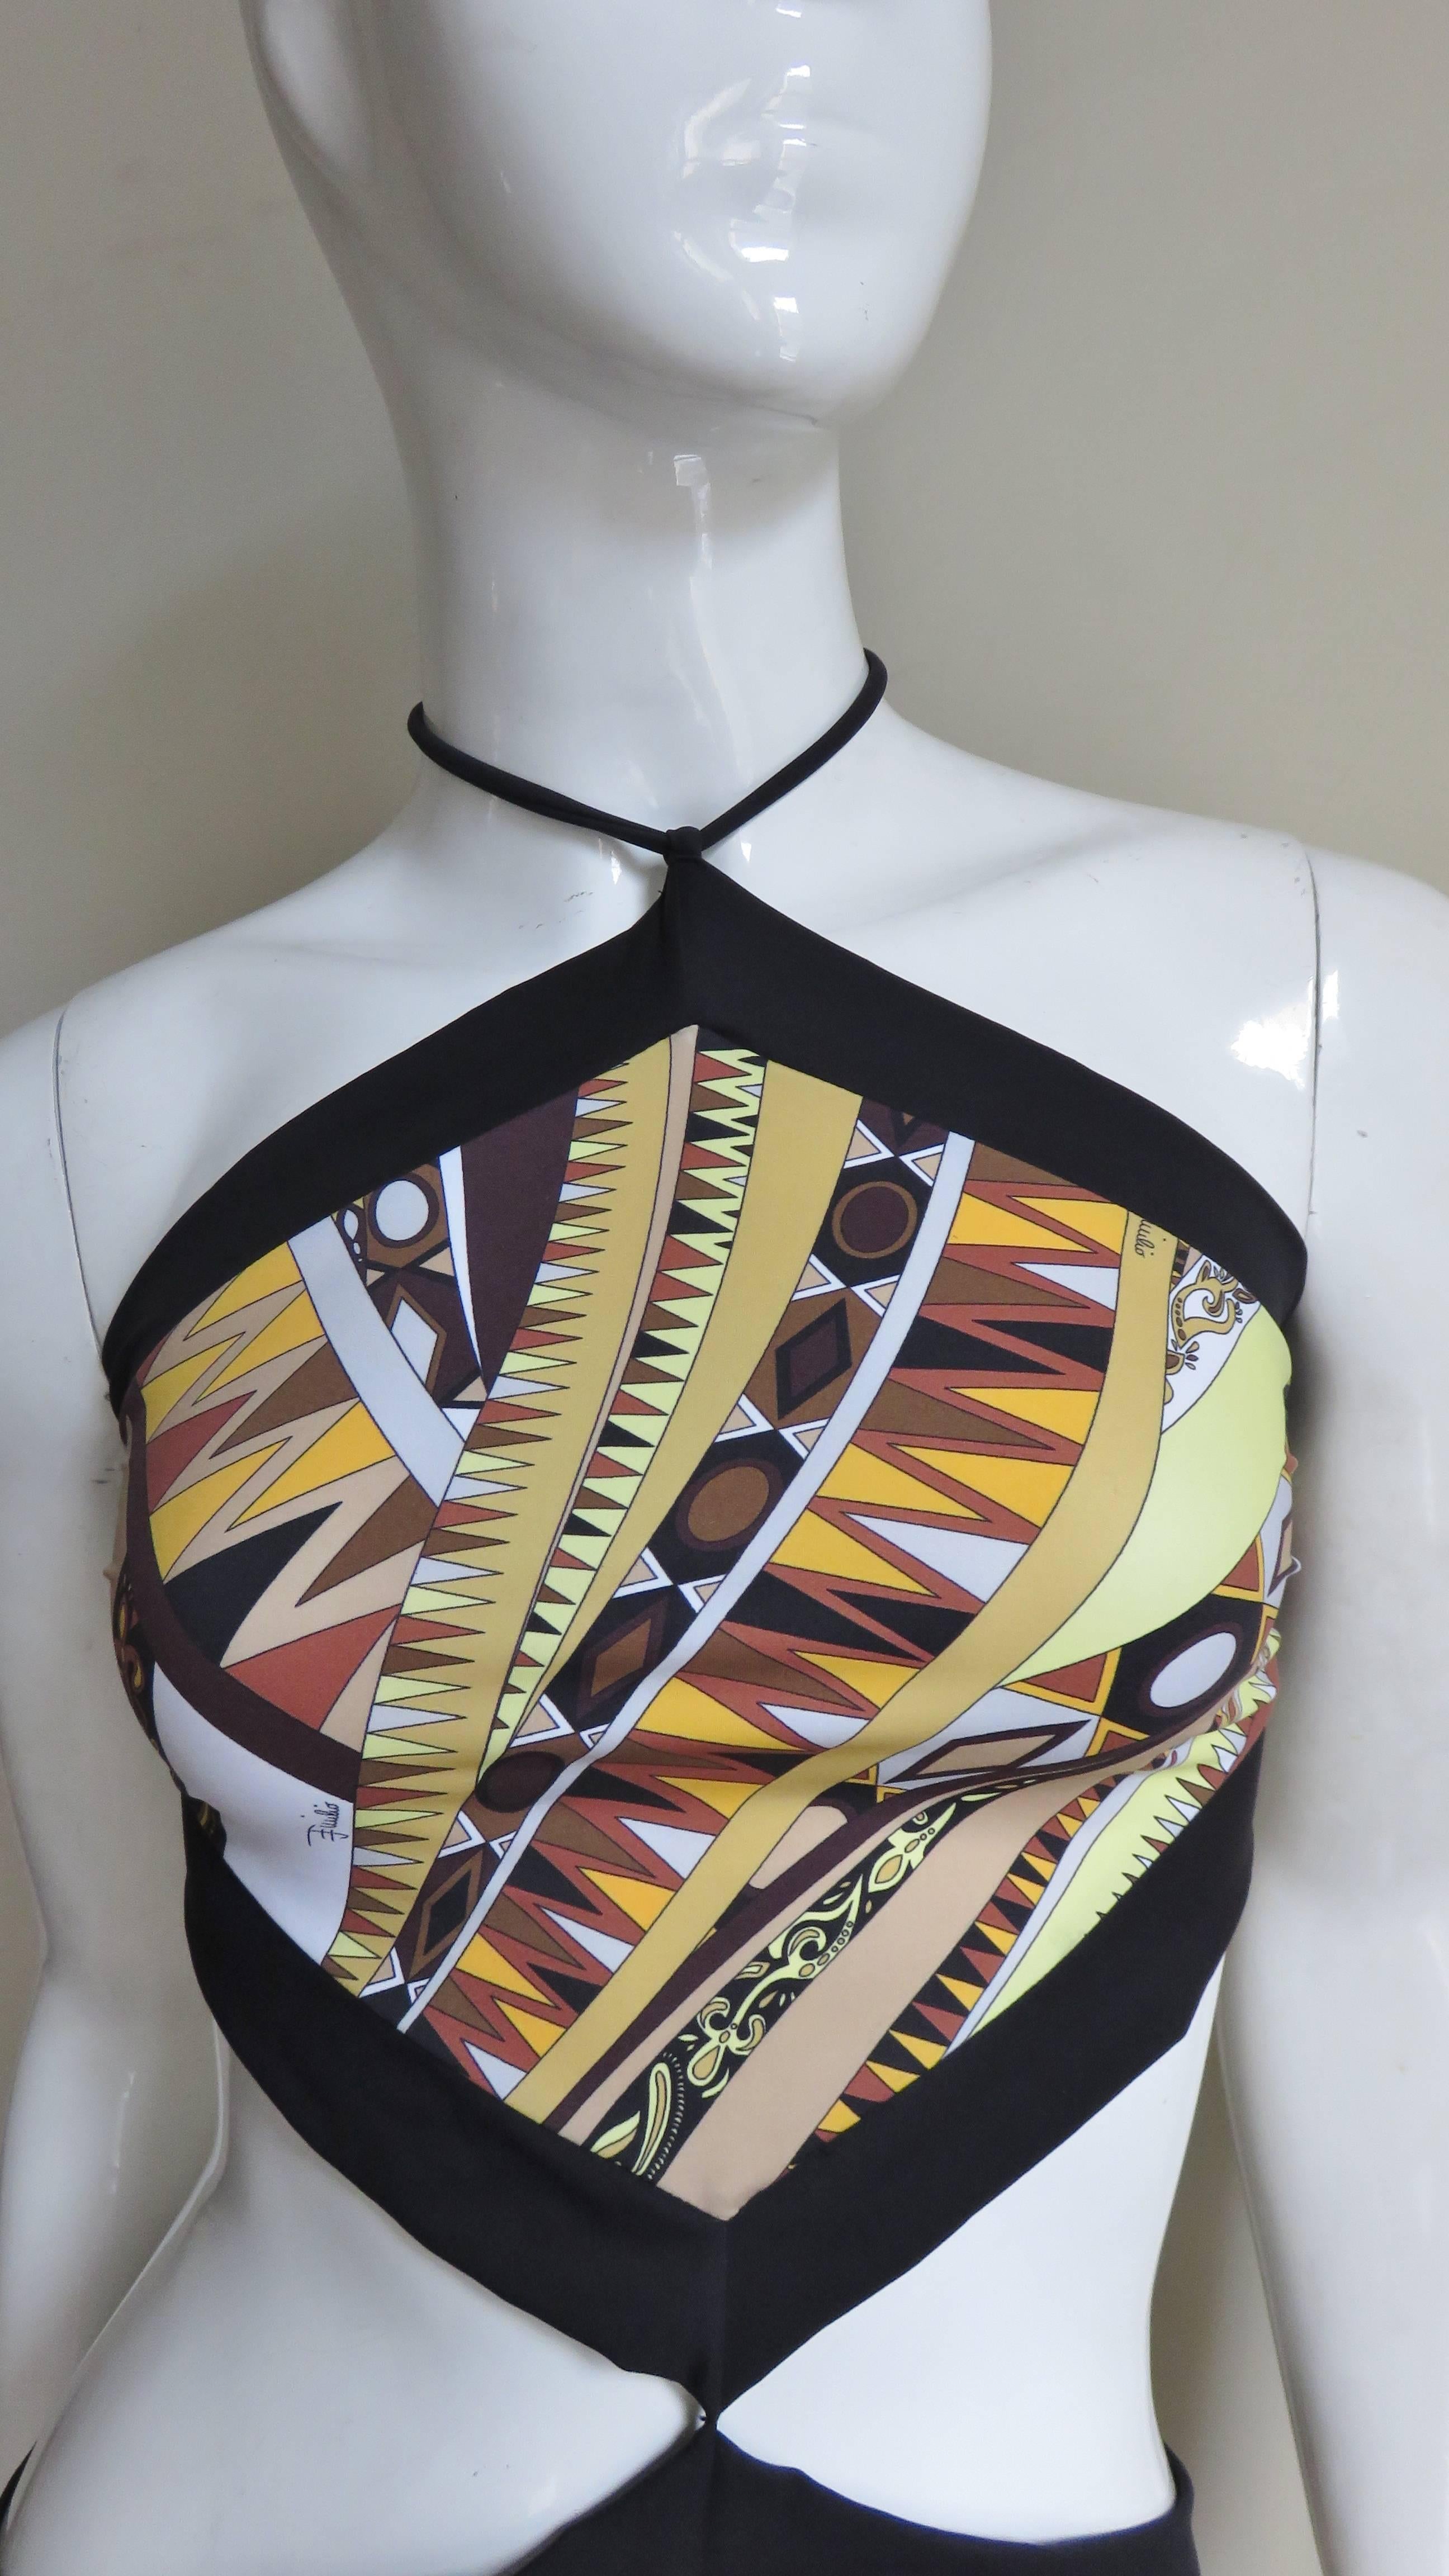 A fabulous monokini from Emilio Pucci.  It is comprised of the intricate geometric mod pattern Pucci is famous for in green, gold, yellow, beige, orange and brown intermittently marked with the Emillo signature. The top and bottom are connected by